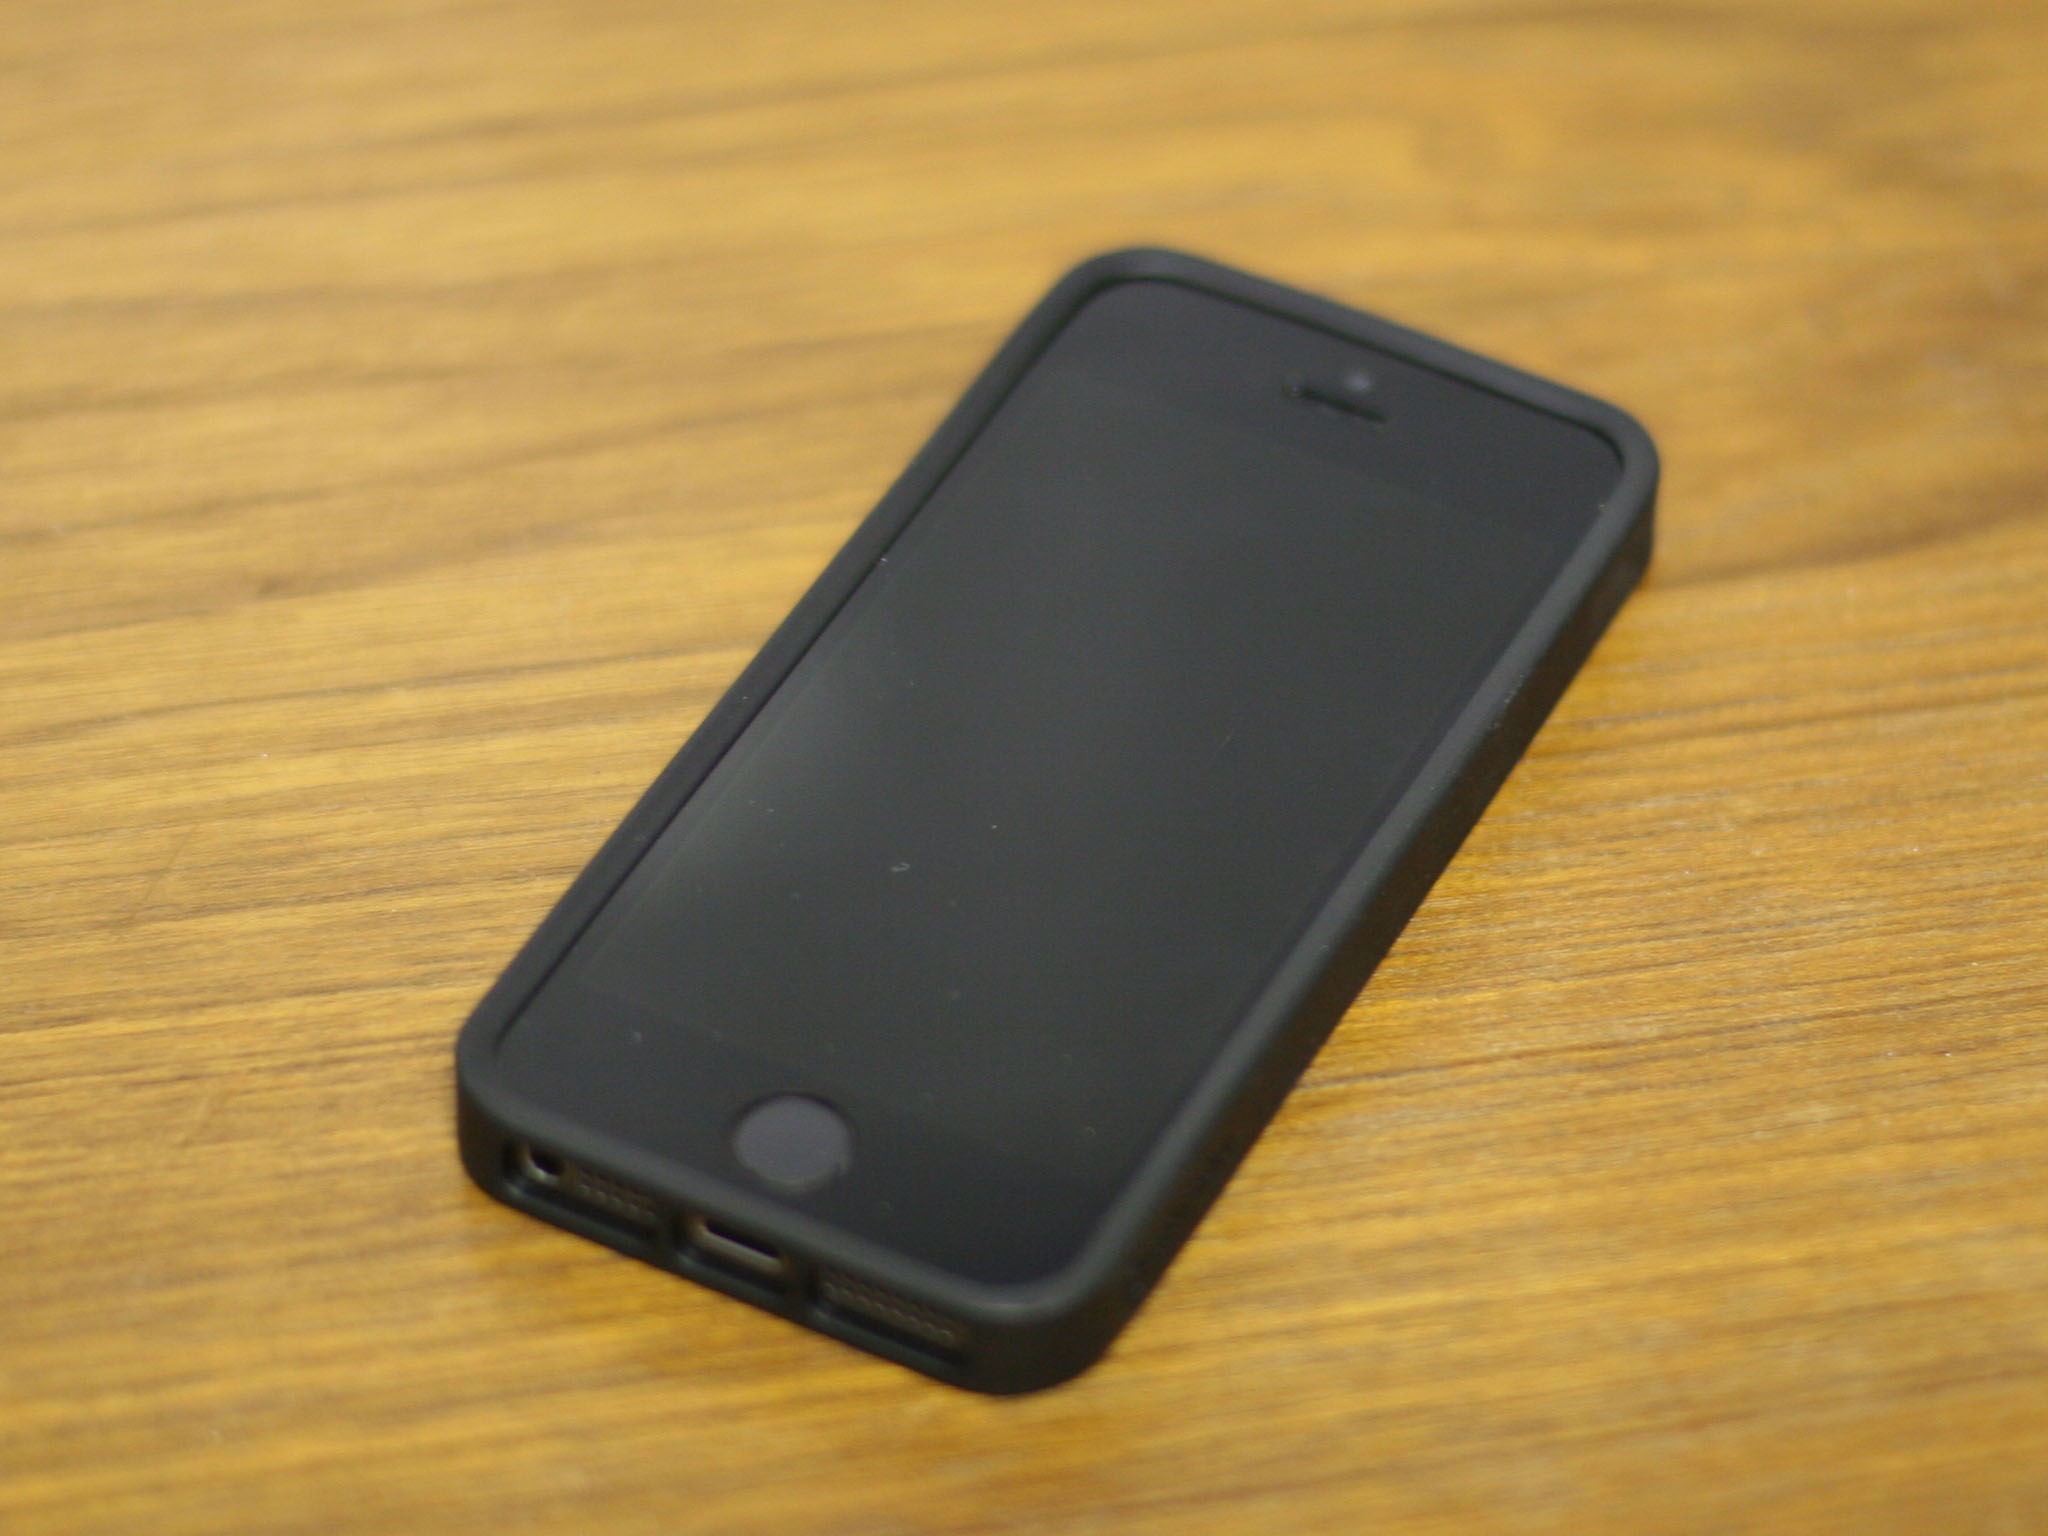 Griffin Reveal case for iPhone 5/5s review